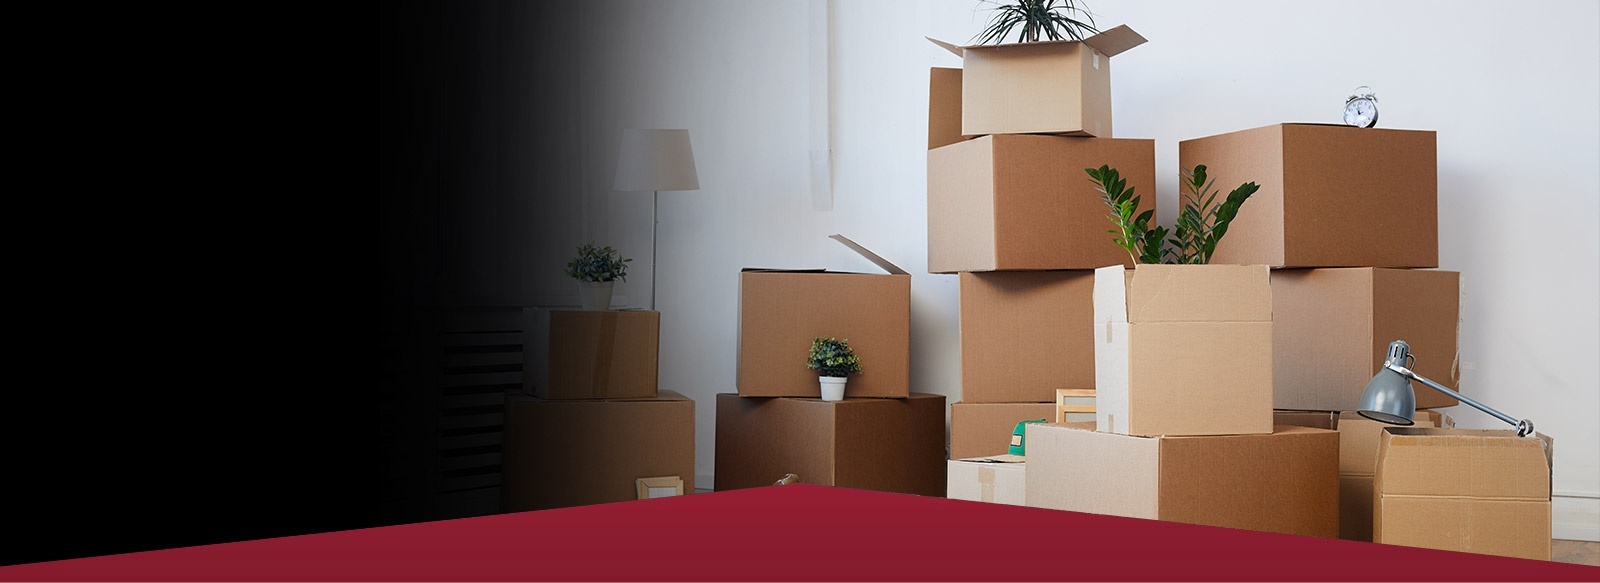 Pro Packing Services offered by Coraza Movers across Toronto, Ontario